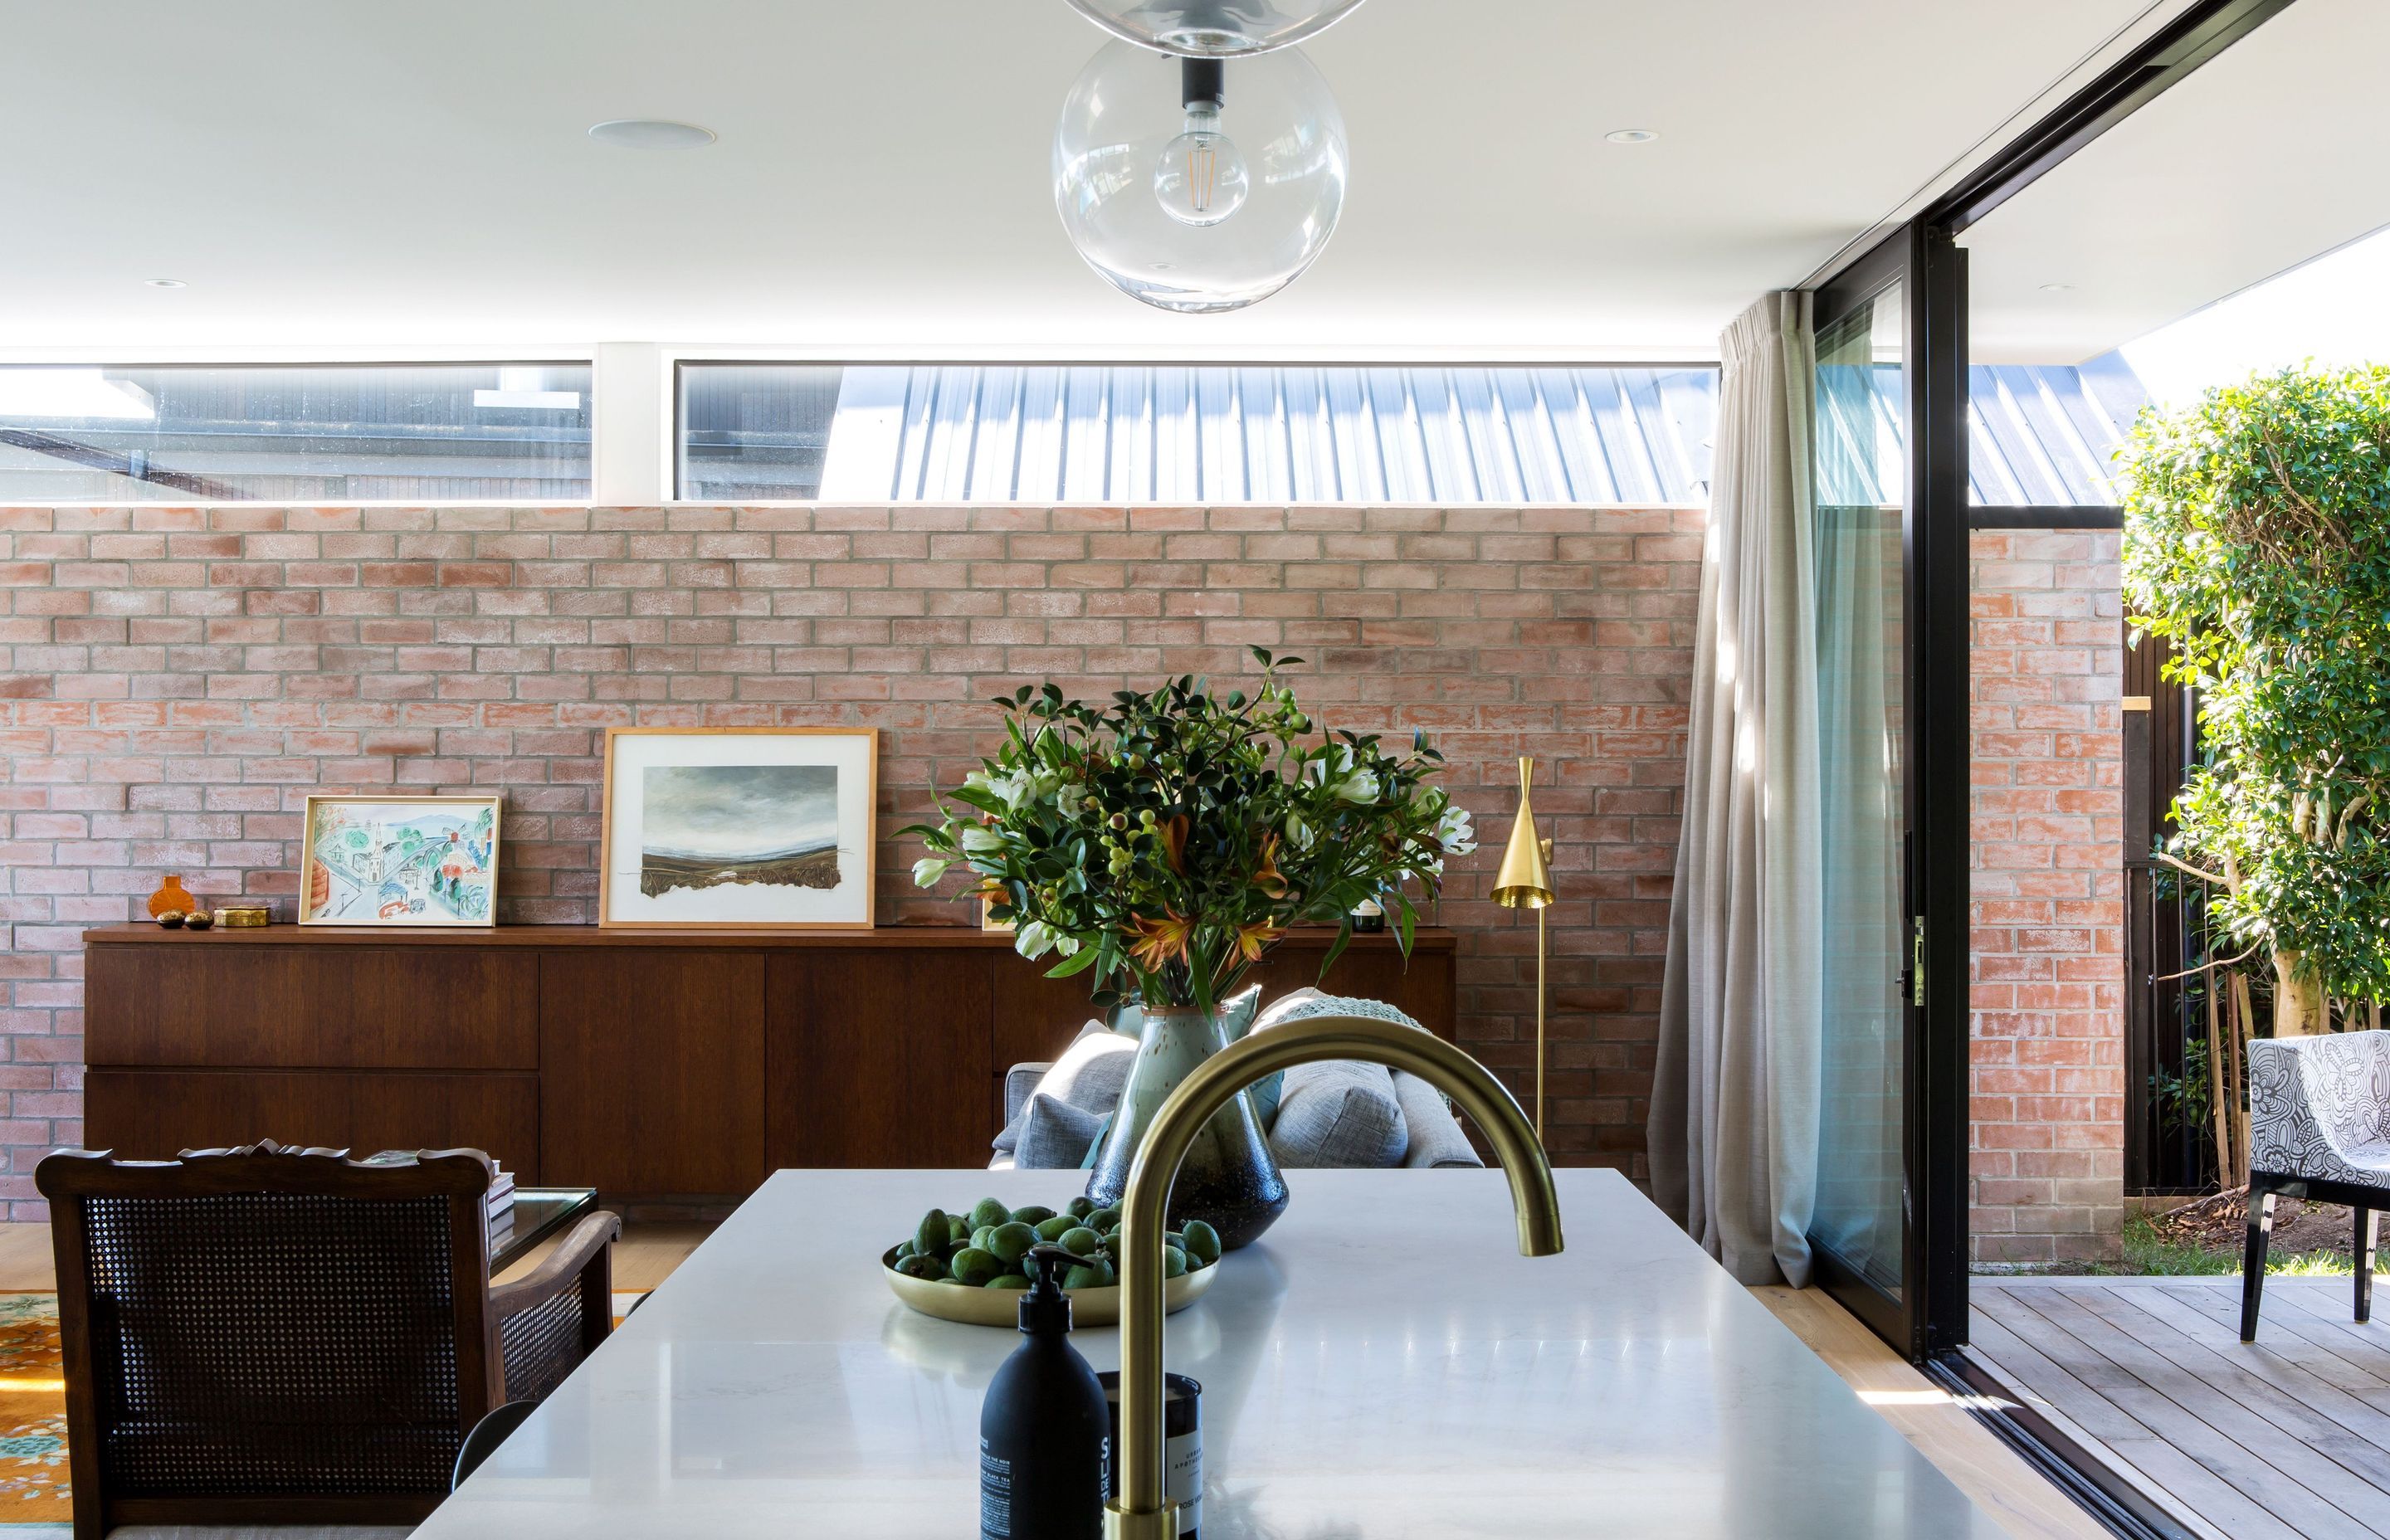 A feature wall in the lounge showcases recycled bricks from the previous brick-and-tile house on the site that was demolished to make room for this home.